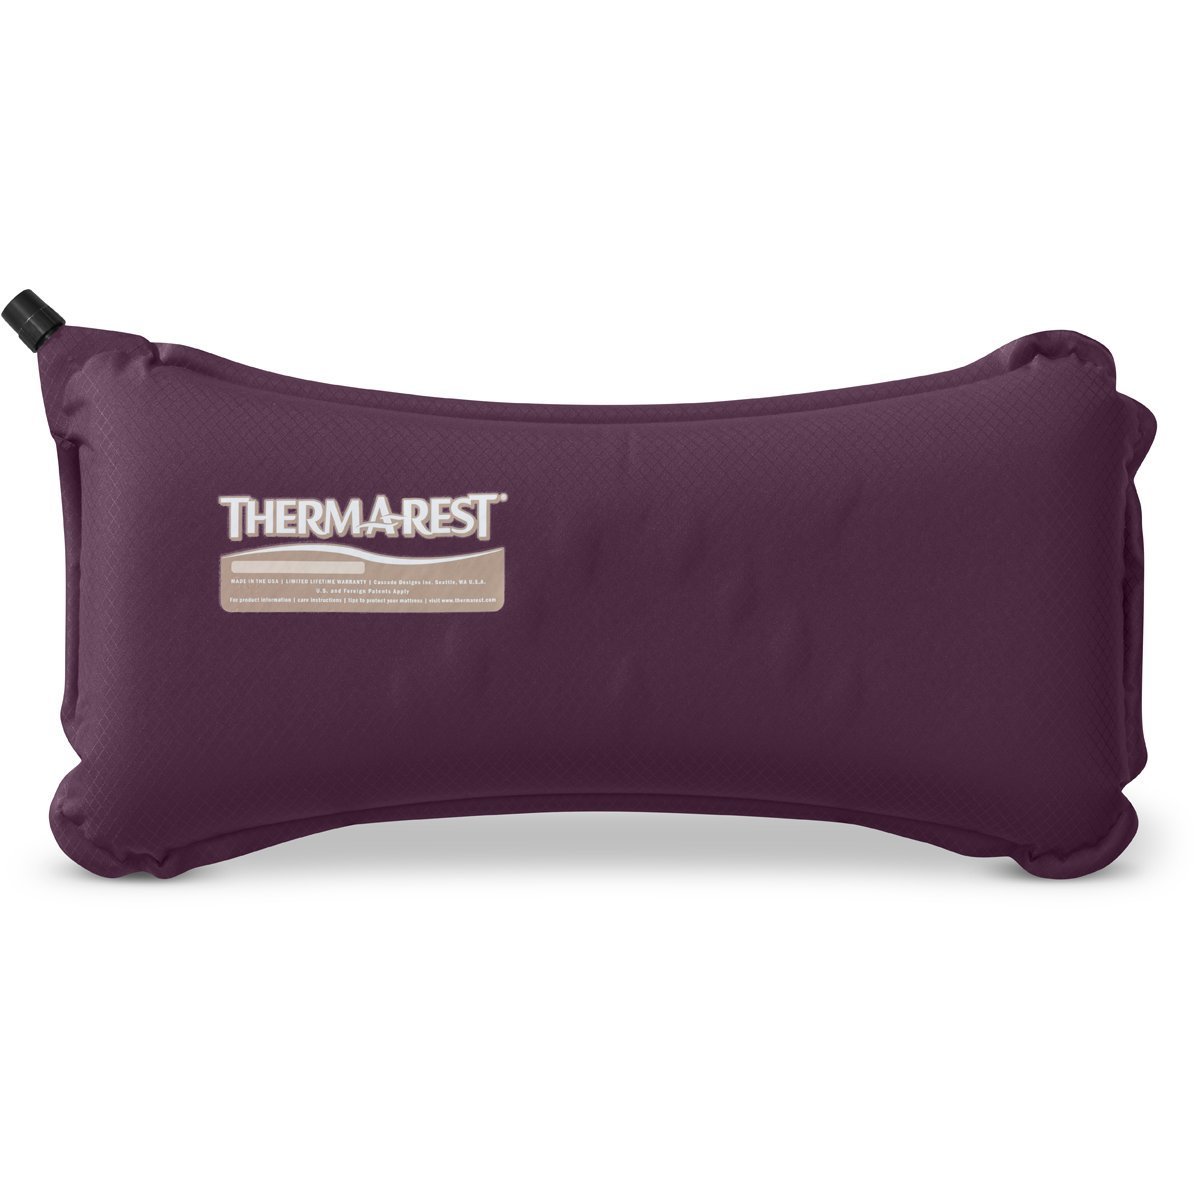 Therm-a-Rest Lumbar Travel Pillow, Eggplant